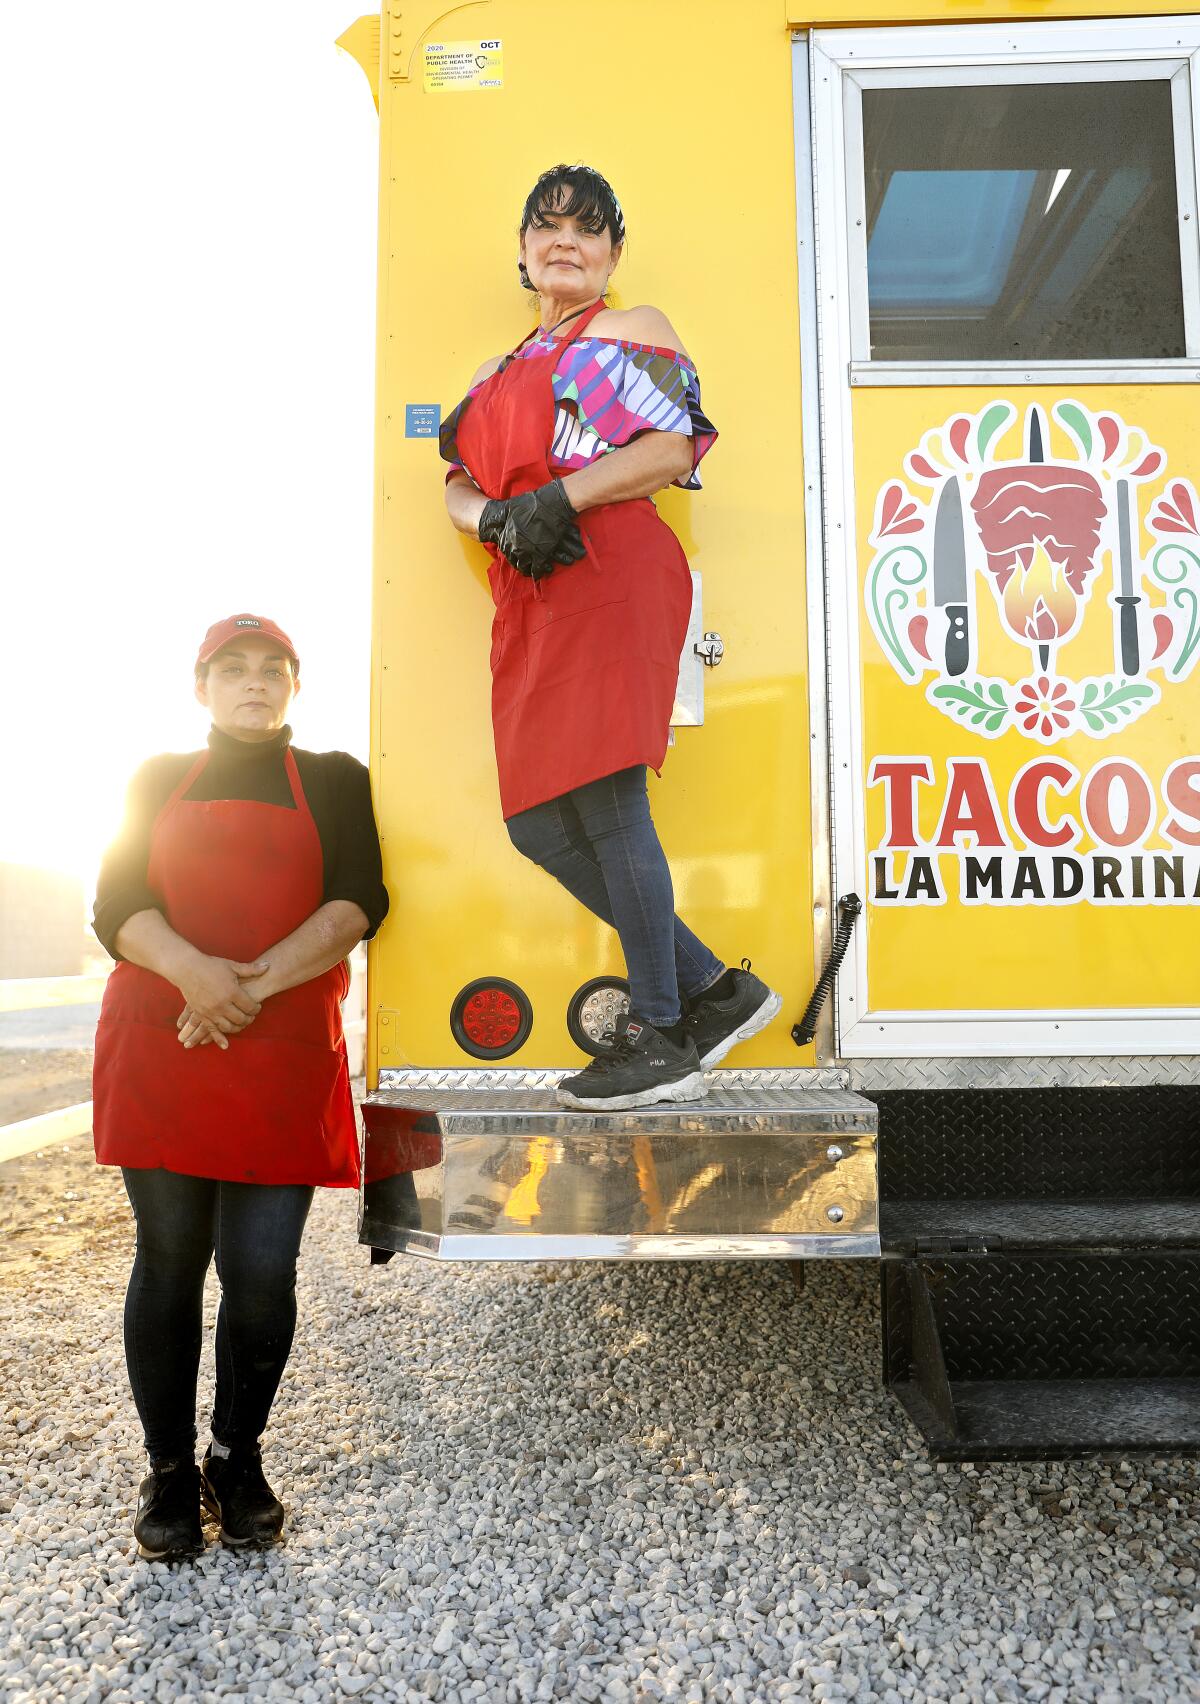 Maria Cárdenas, right, and her sister Esmeralda Cárdenas, left, pooled their savings to buy the Tacos La Madrina Food Truck, which Cárdenas oversees in Hesperia.